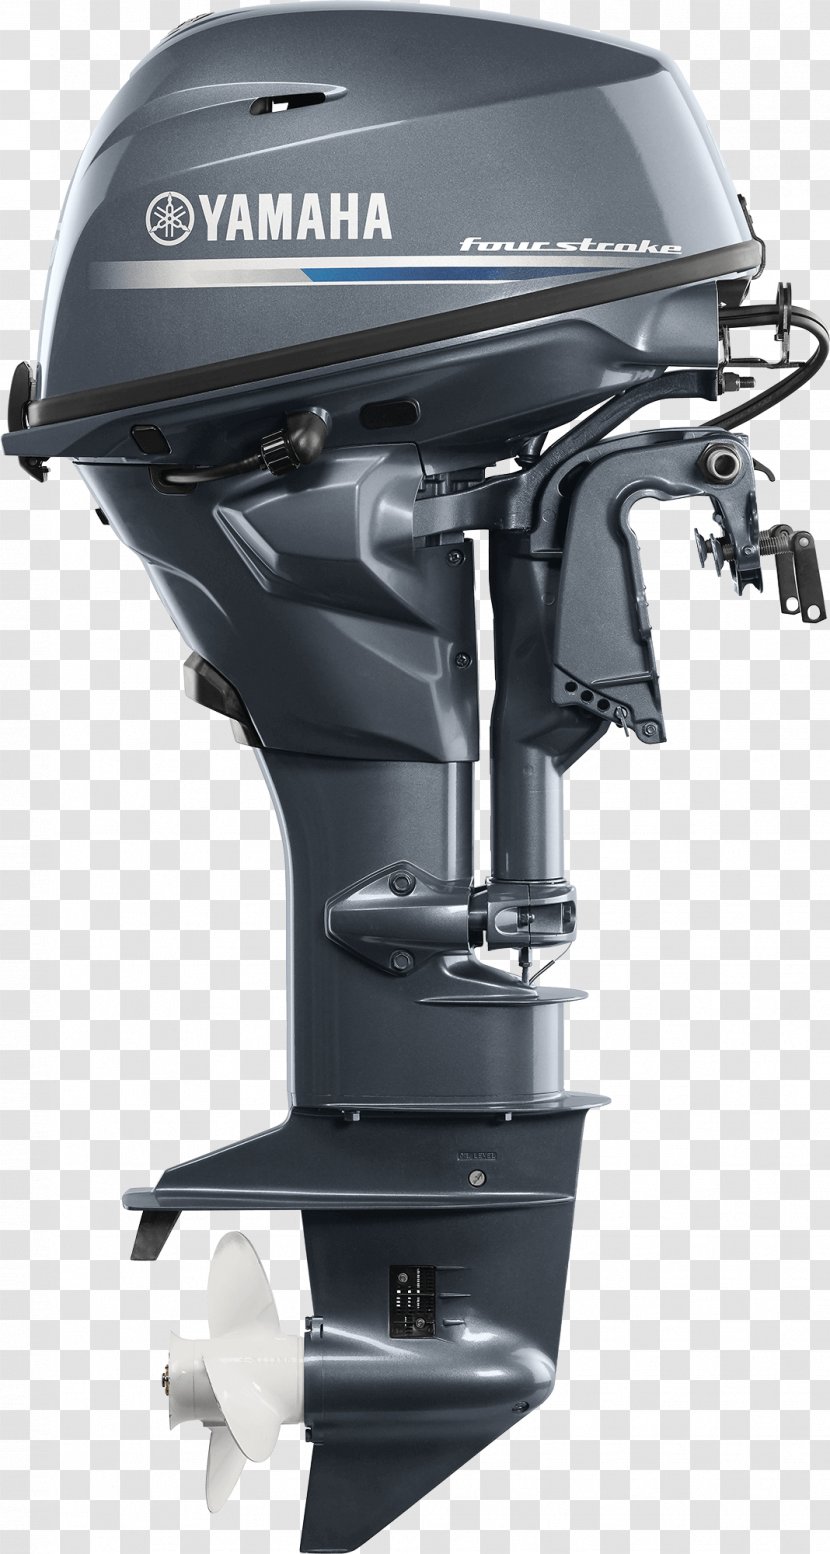 Yamaha Motor Company Outboard Boat Engine Corporation - Canada - Large Anchor Parts Transparent PNG